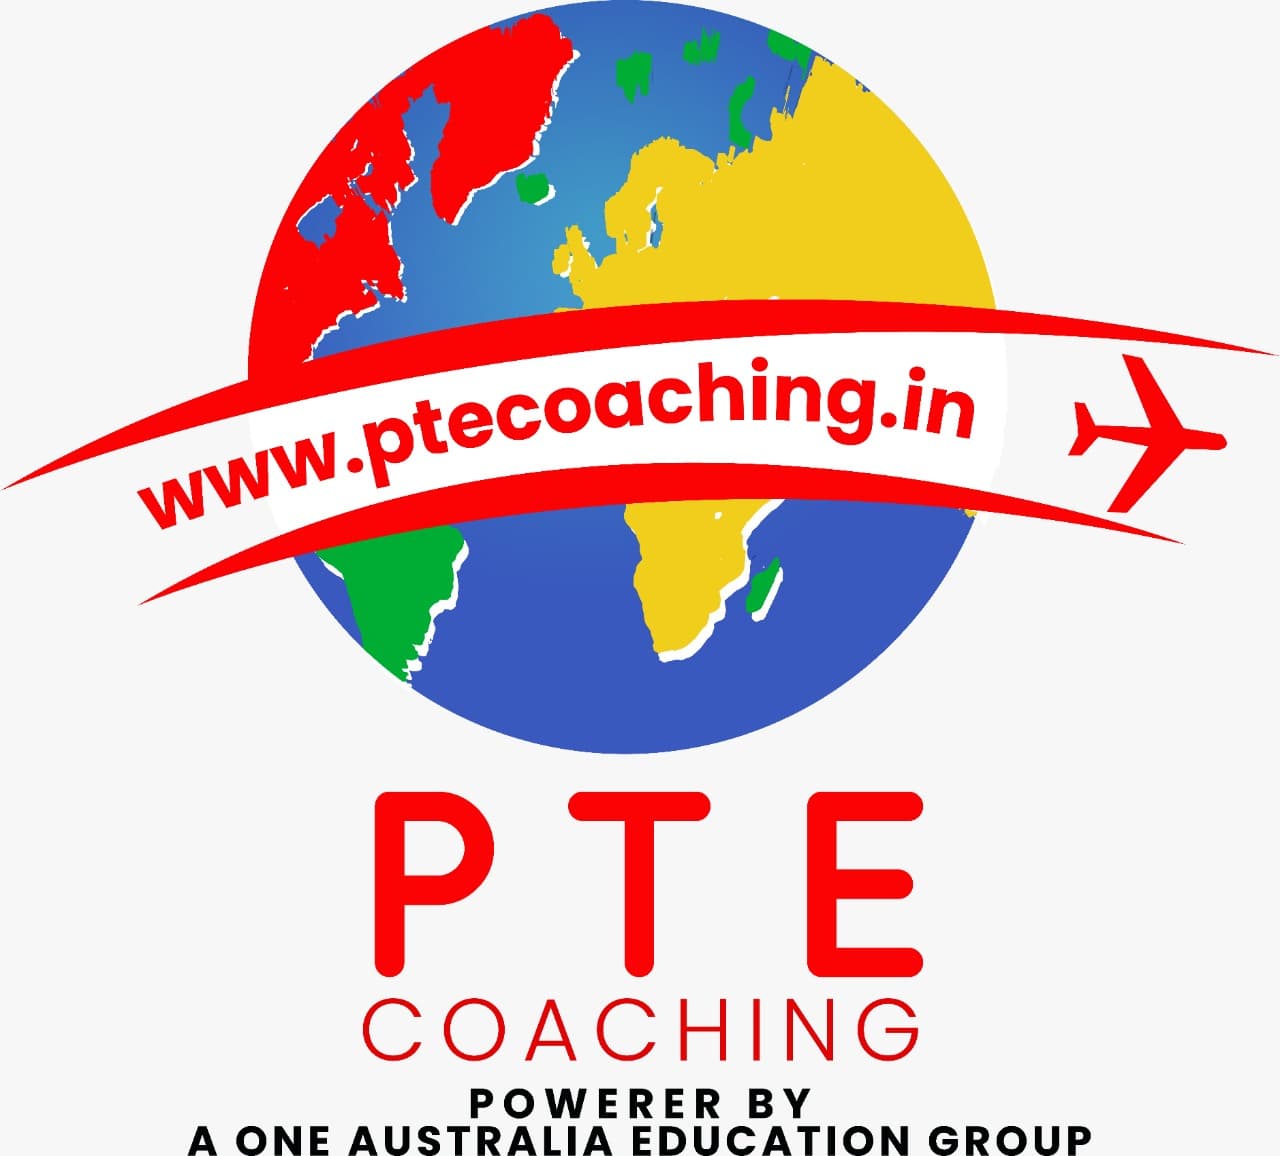 All PTE Coaching Australia Coupons & Deals